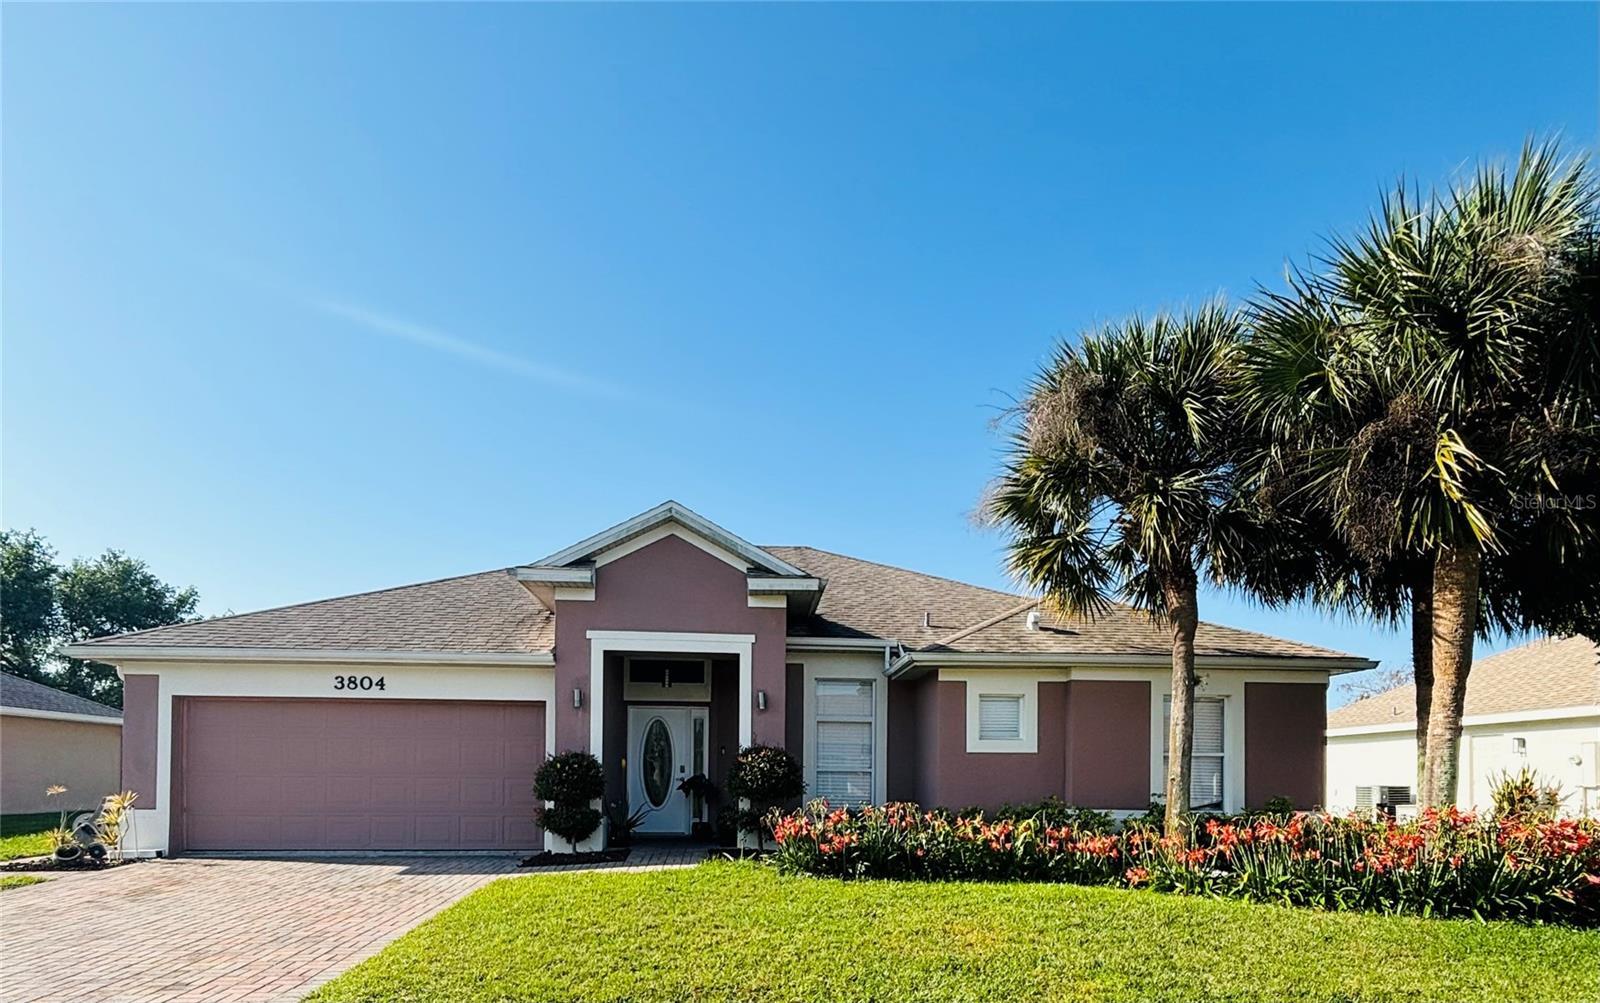 Photo one of 3804 Laurel View Dr Kissimmee FL 34744 | MLS S5102933